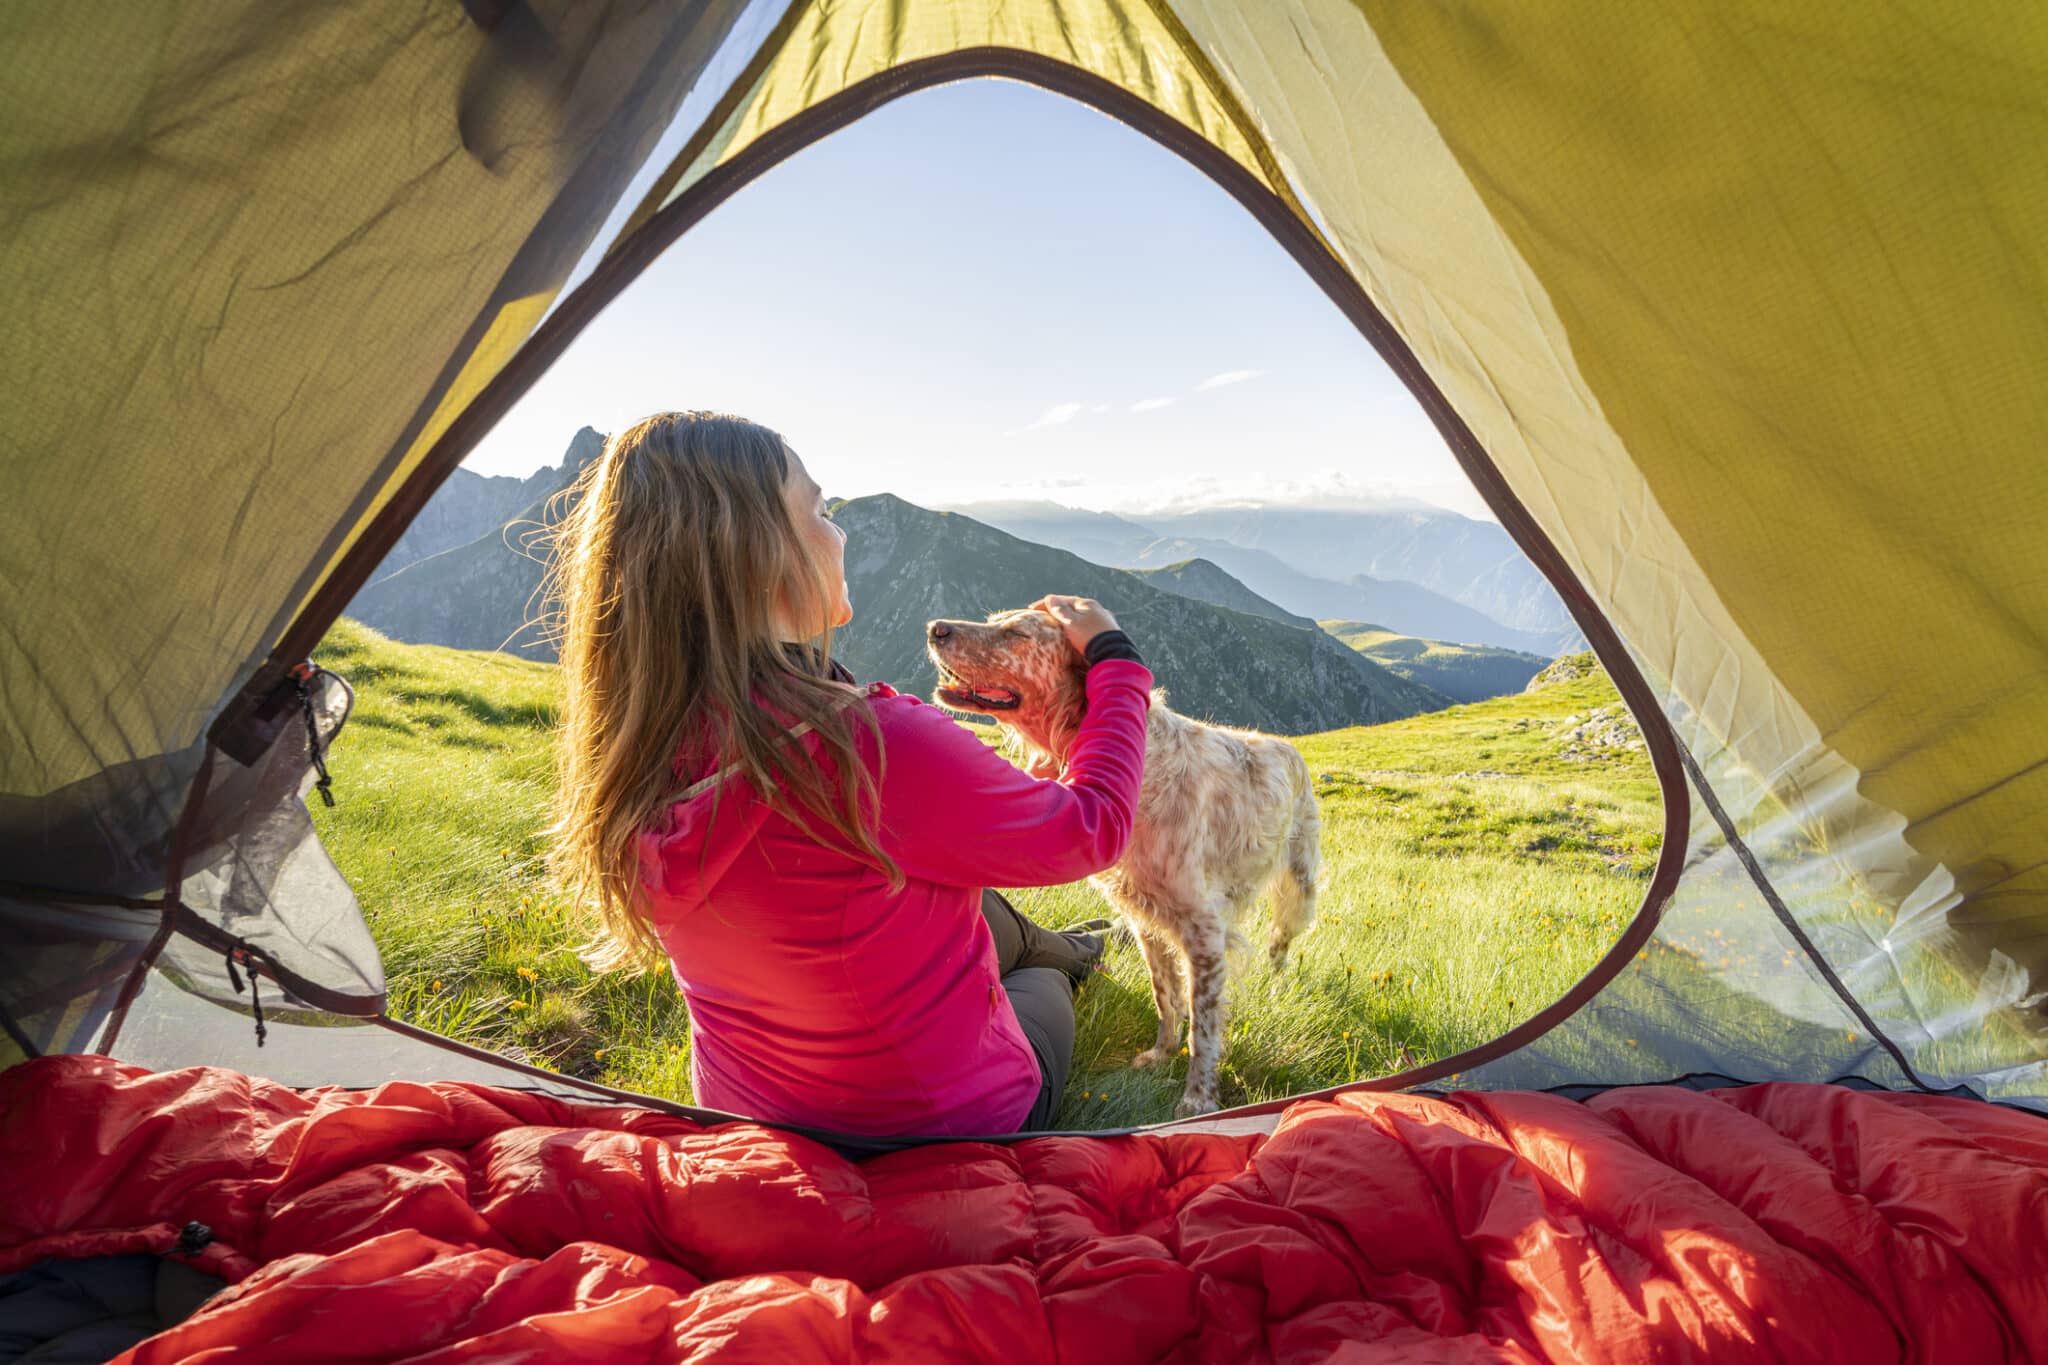 A labor & delivery travel nurse enjoying time off with her dog in a tent